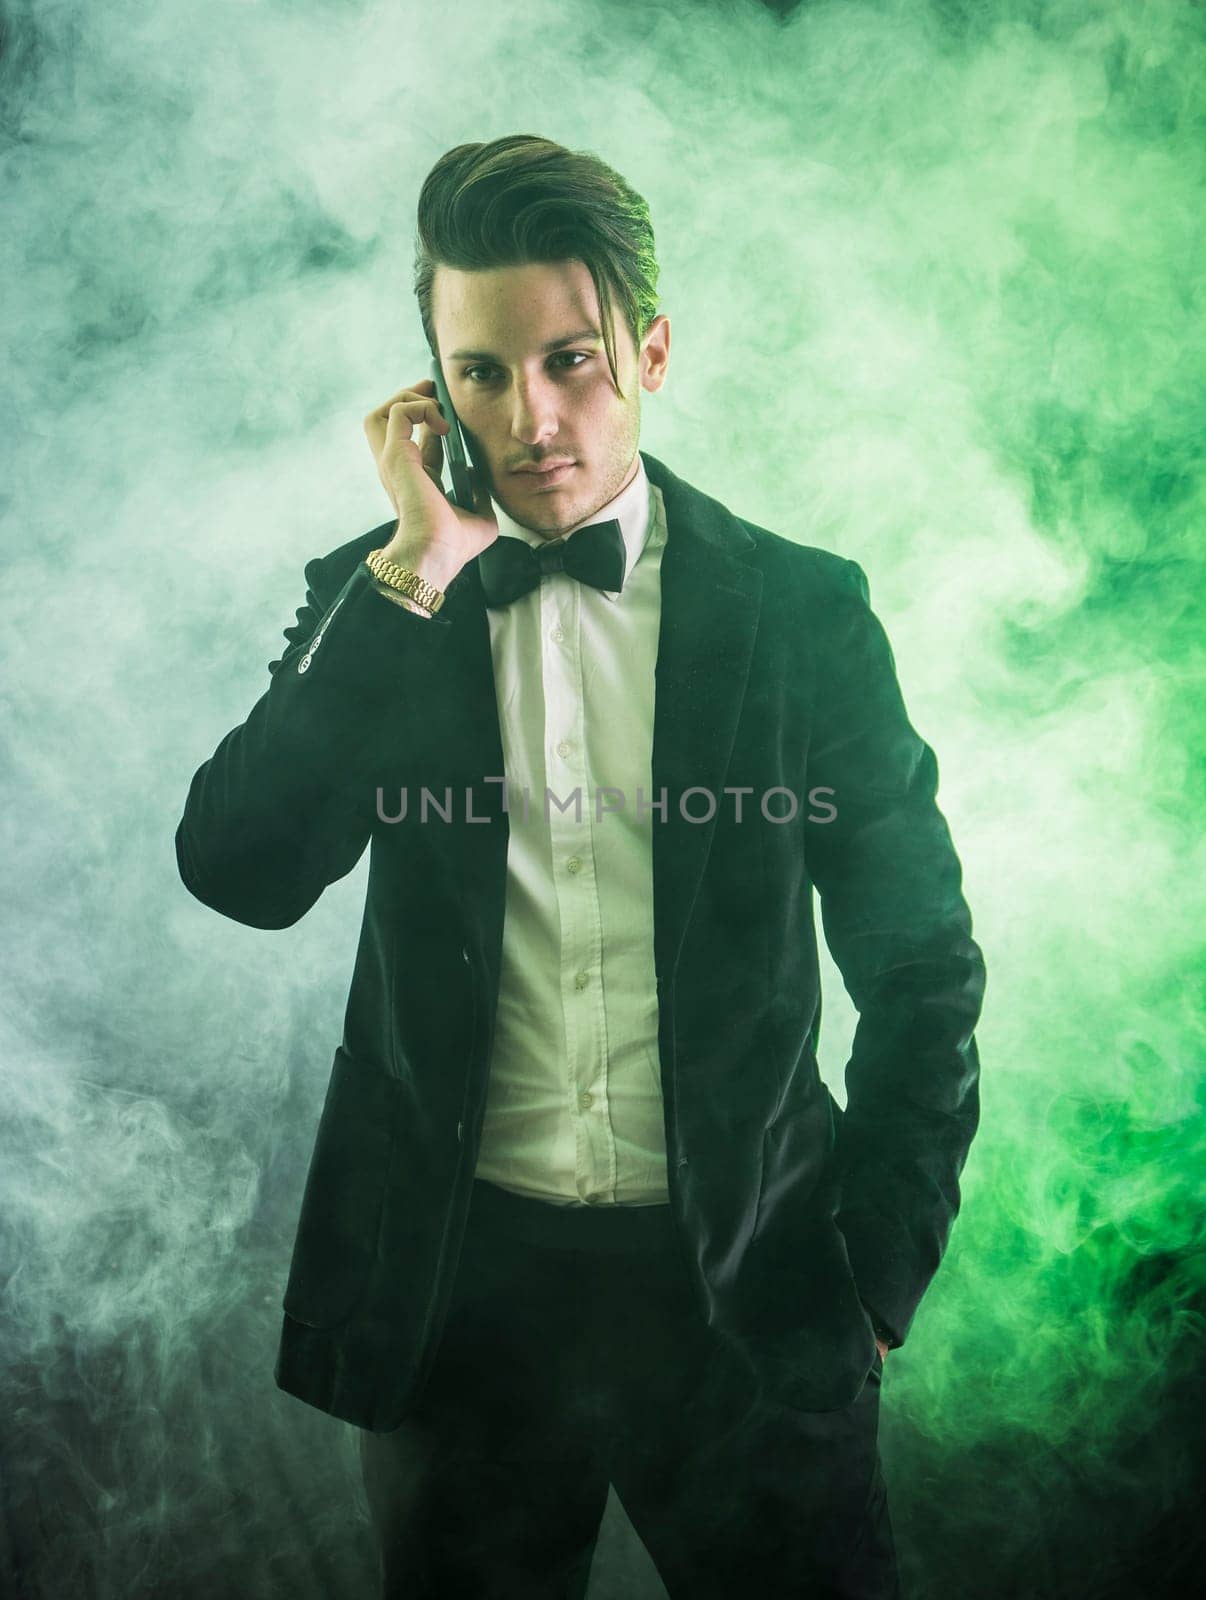 A man in a tuxedo talking on a cell phone